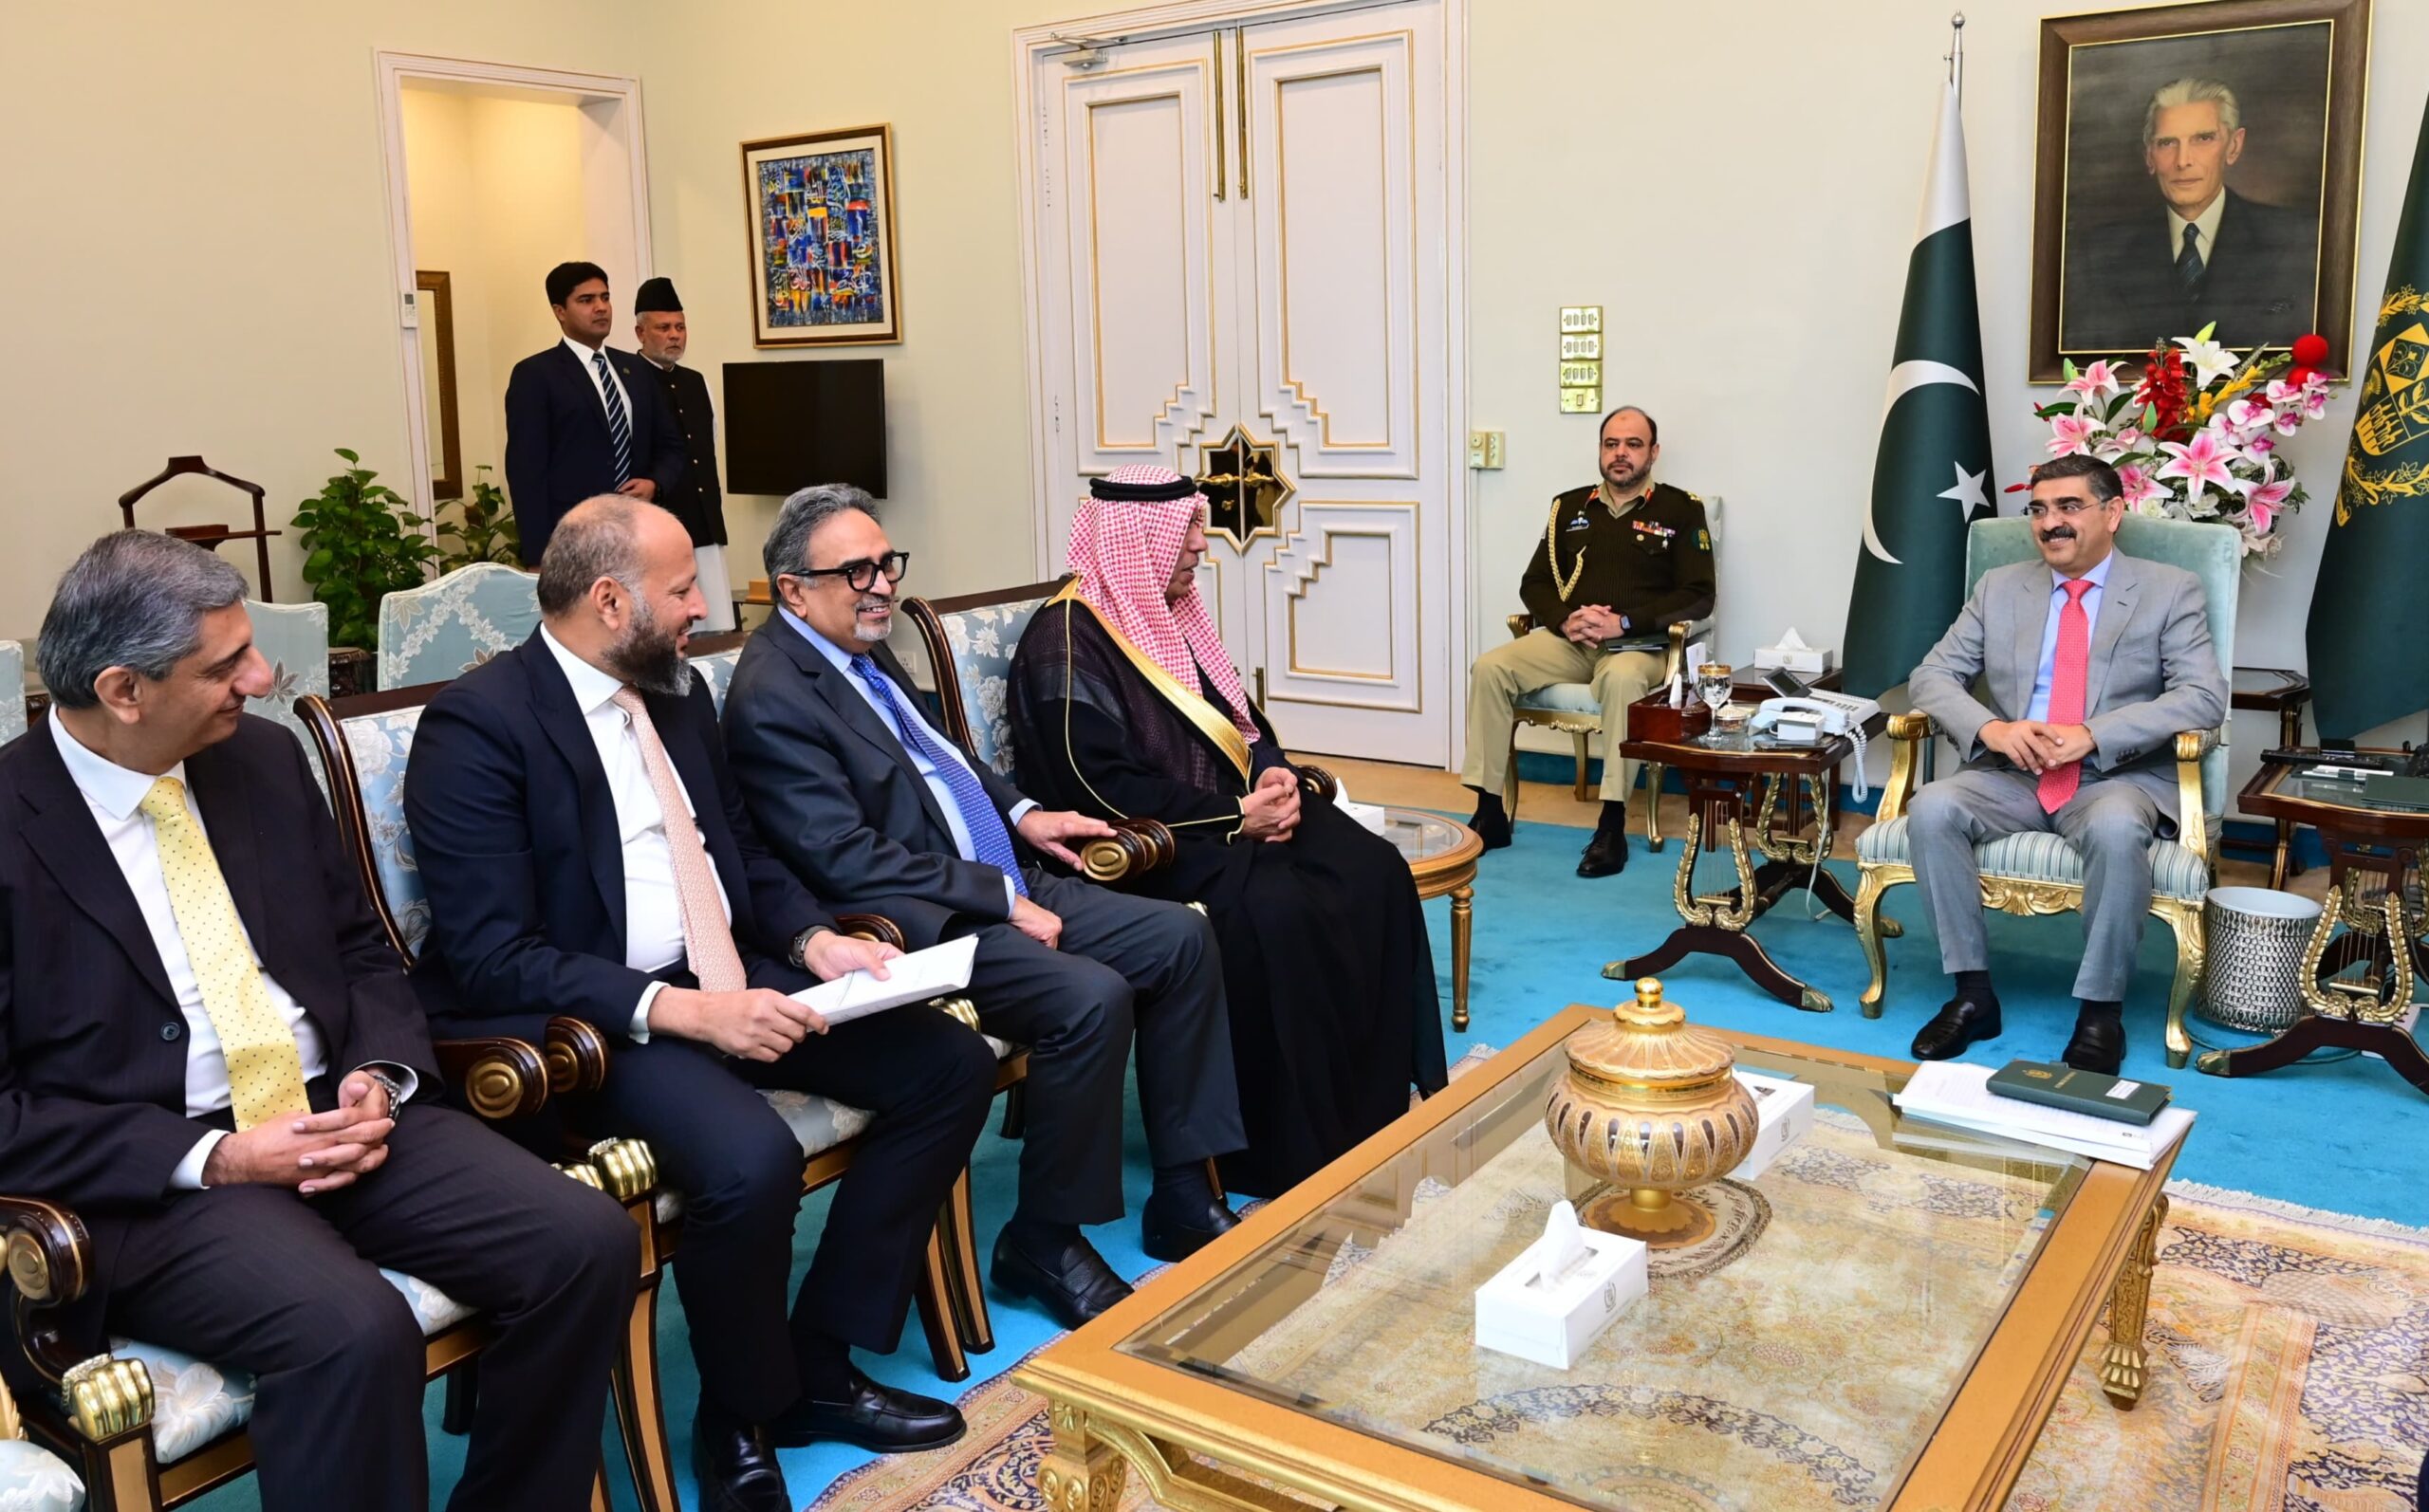 PM urges Saudi Arabia’s Jomaih Group to invest in Pakistan’s alternative energy sector.